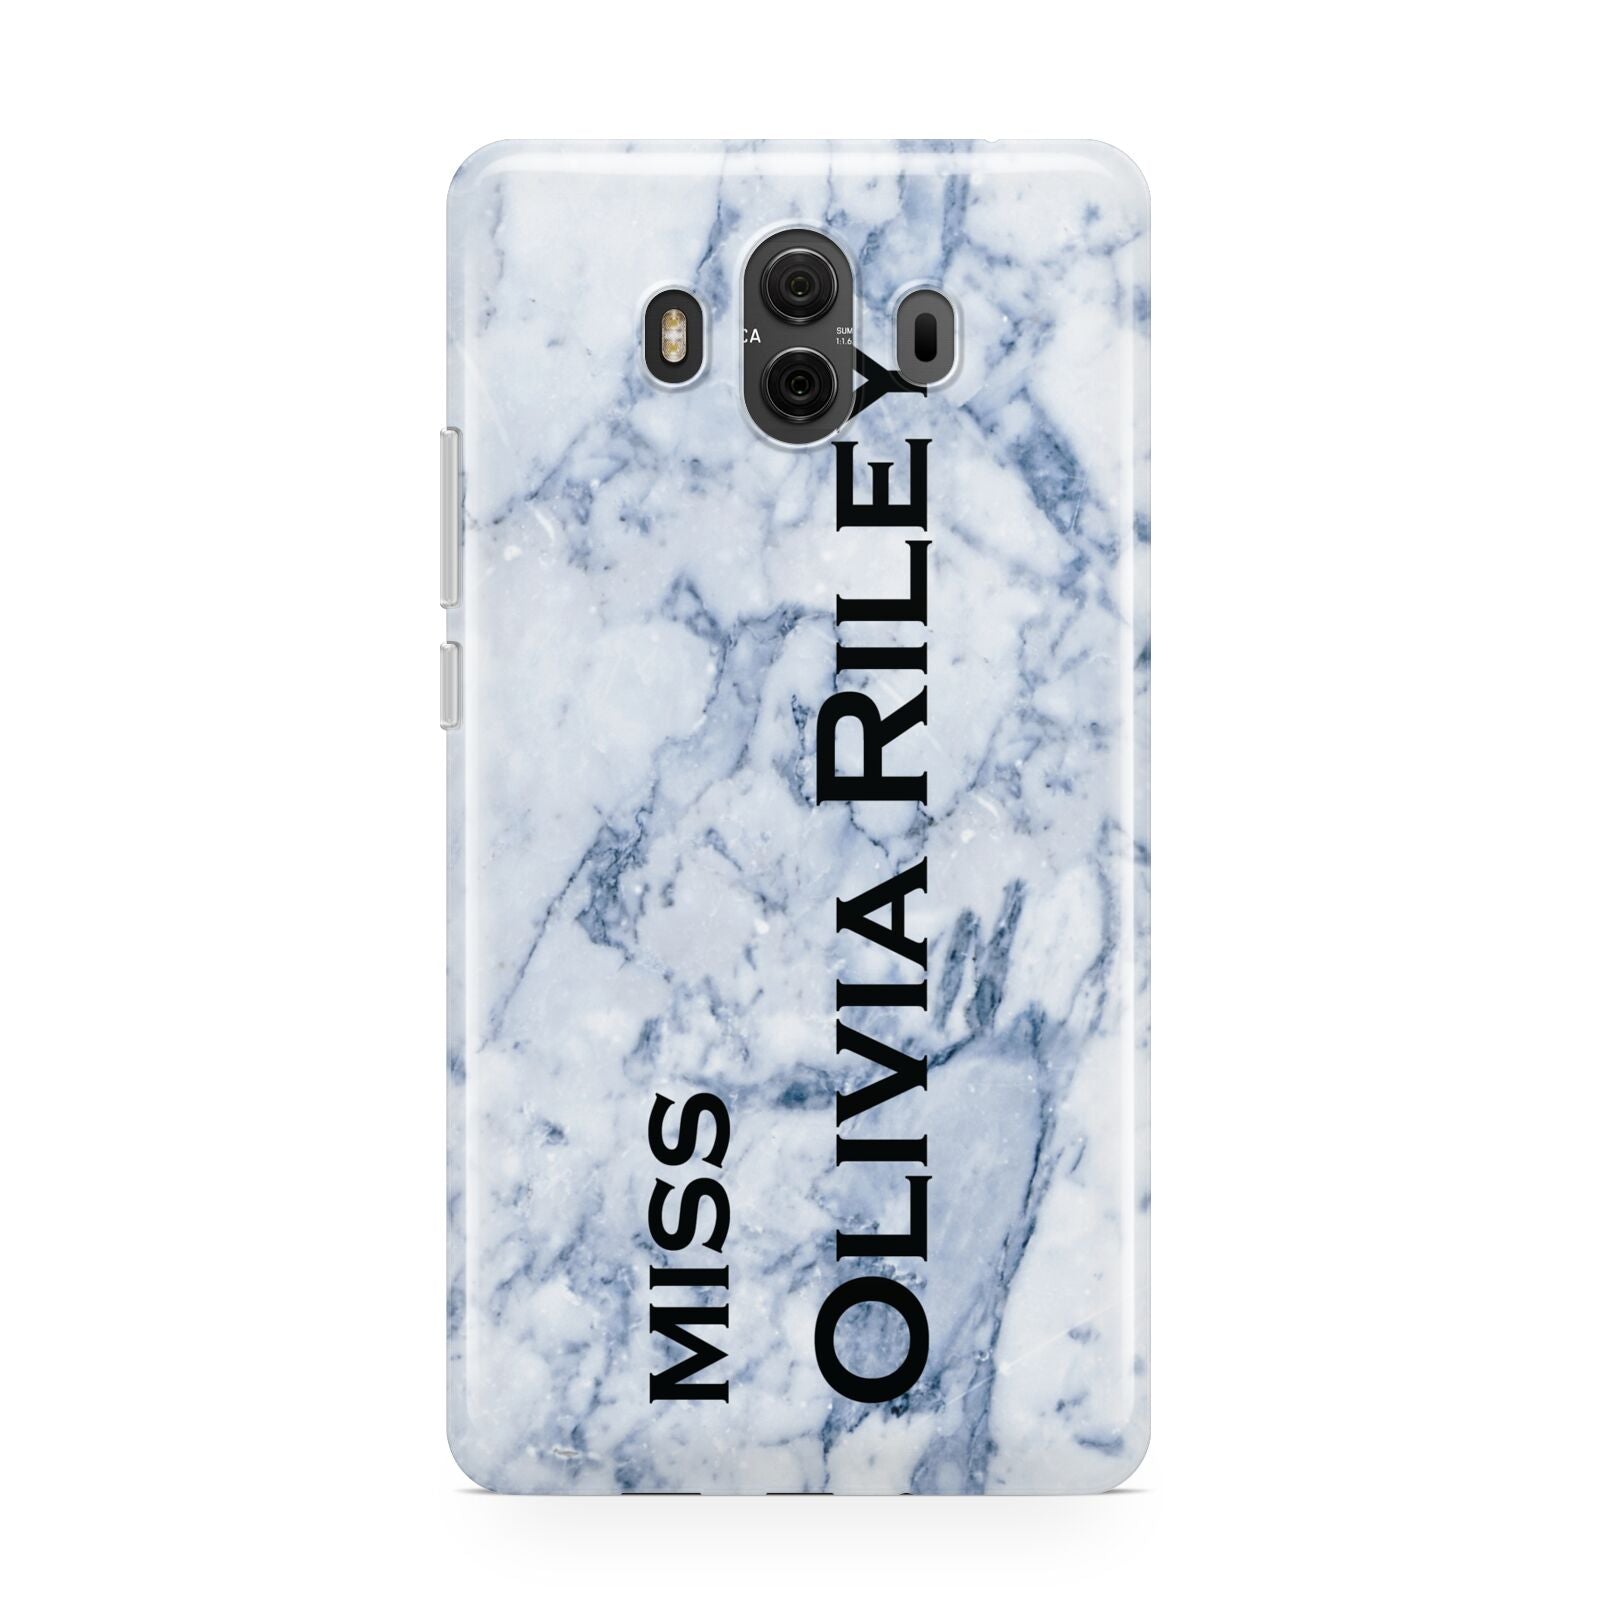 Full Name Grey Marble Huawei Mate 10 Protective Phone Case